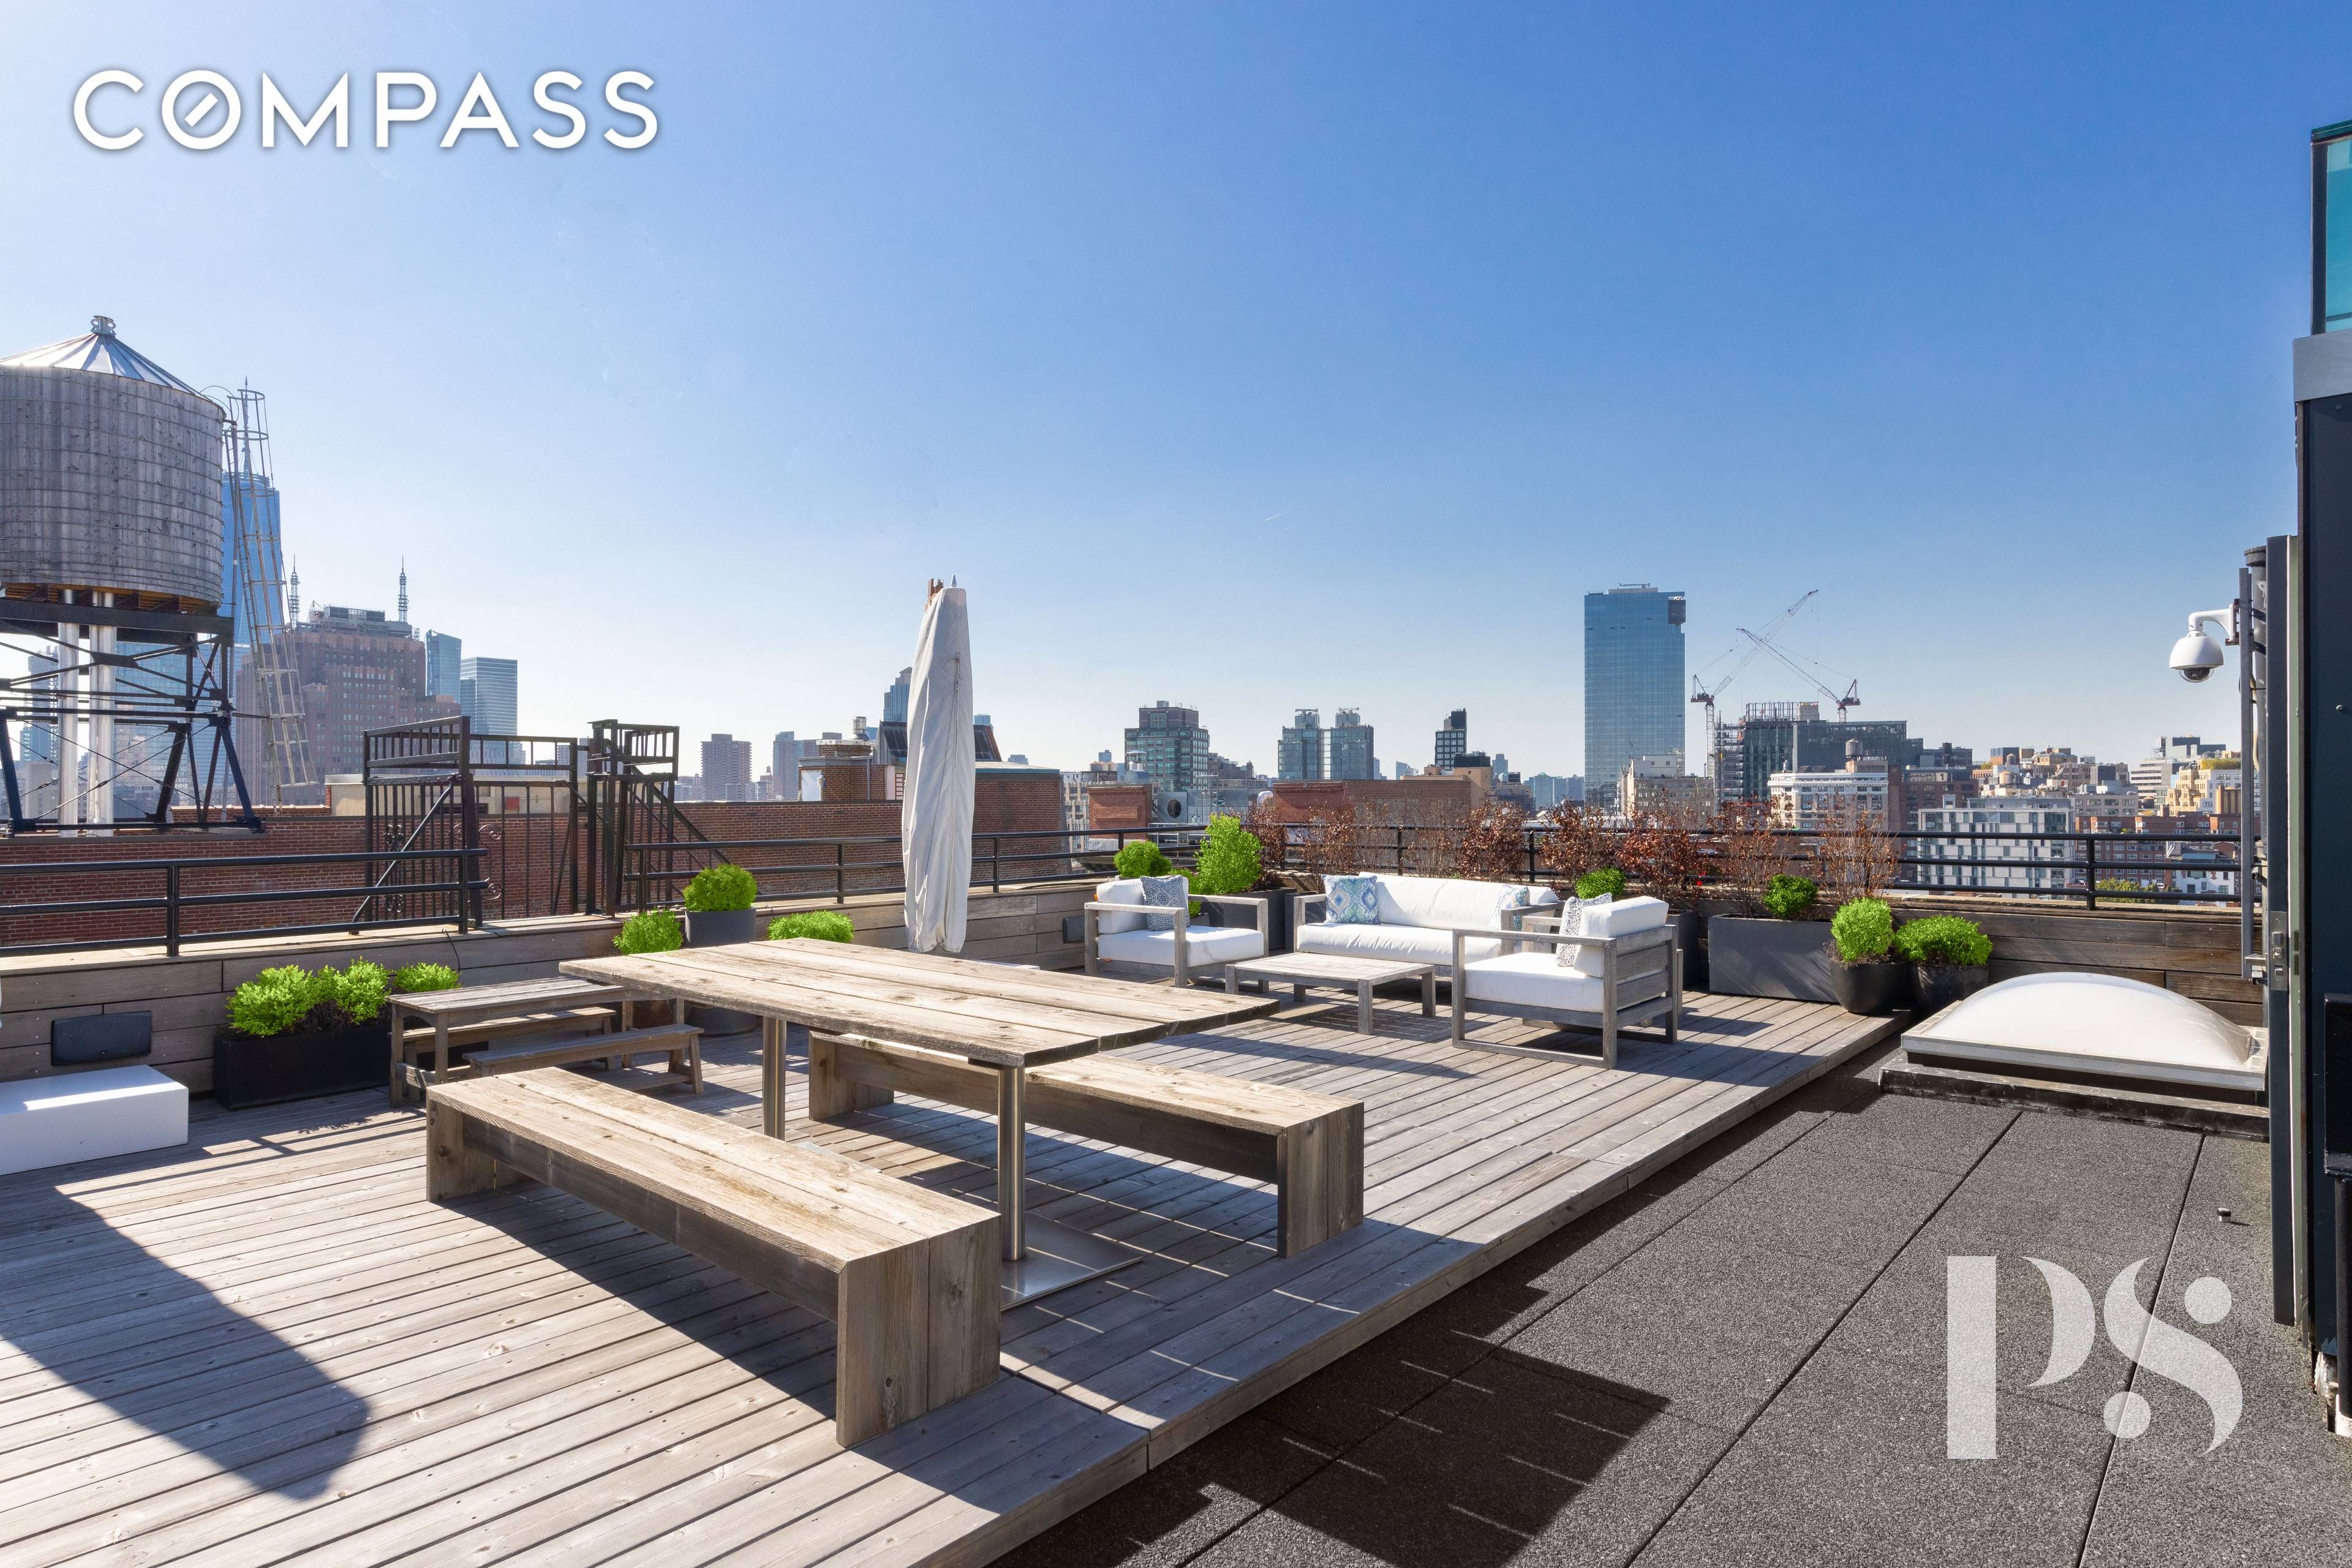 88 Prince Street. Perched high atop the famed Singer Building sits this immaculate, trophy, one of a kind penthouse loft above the iconic streets of SoHo.